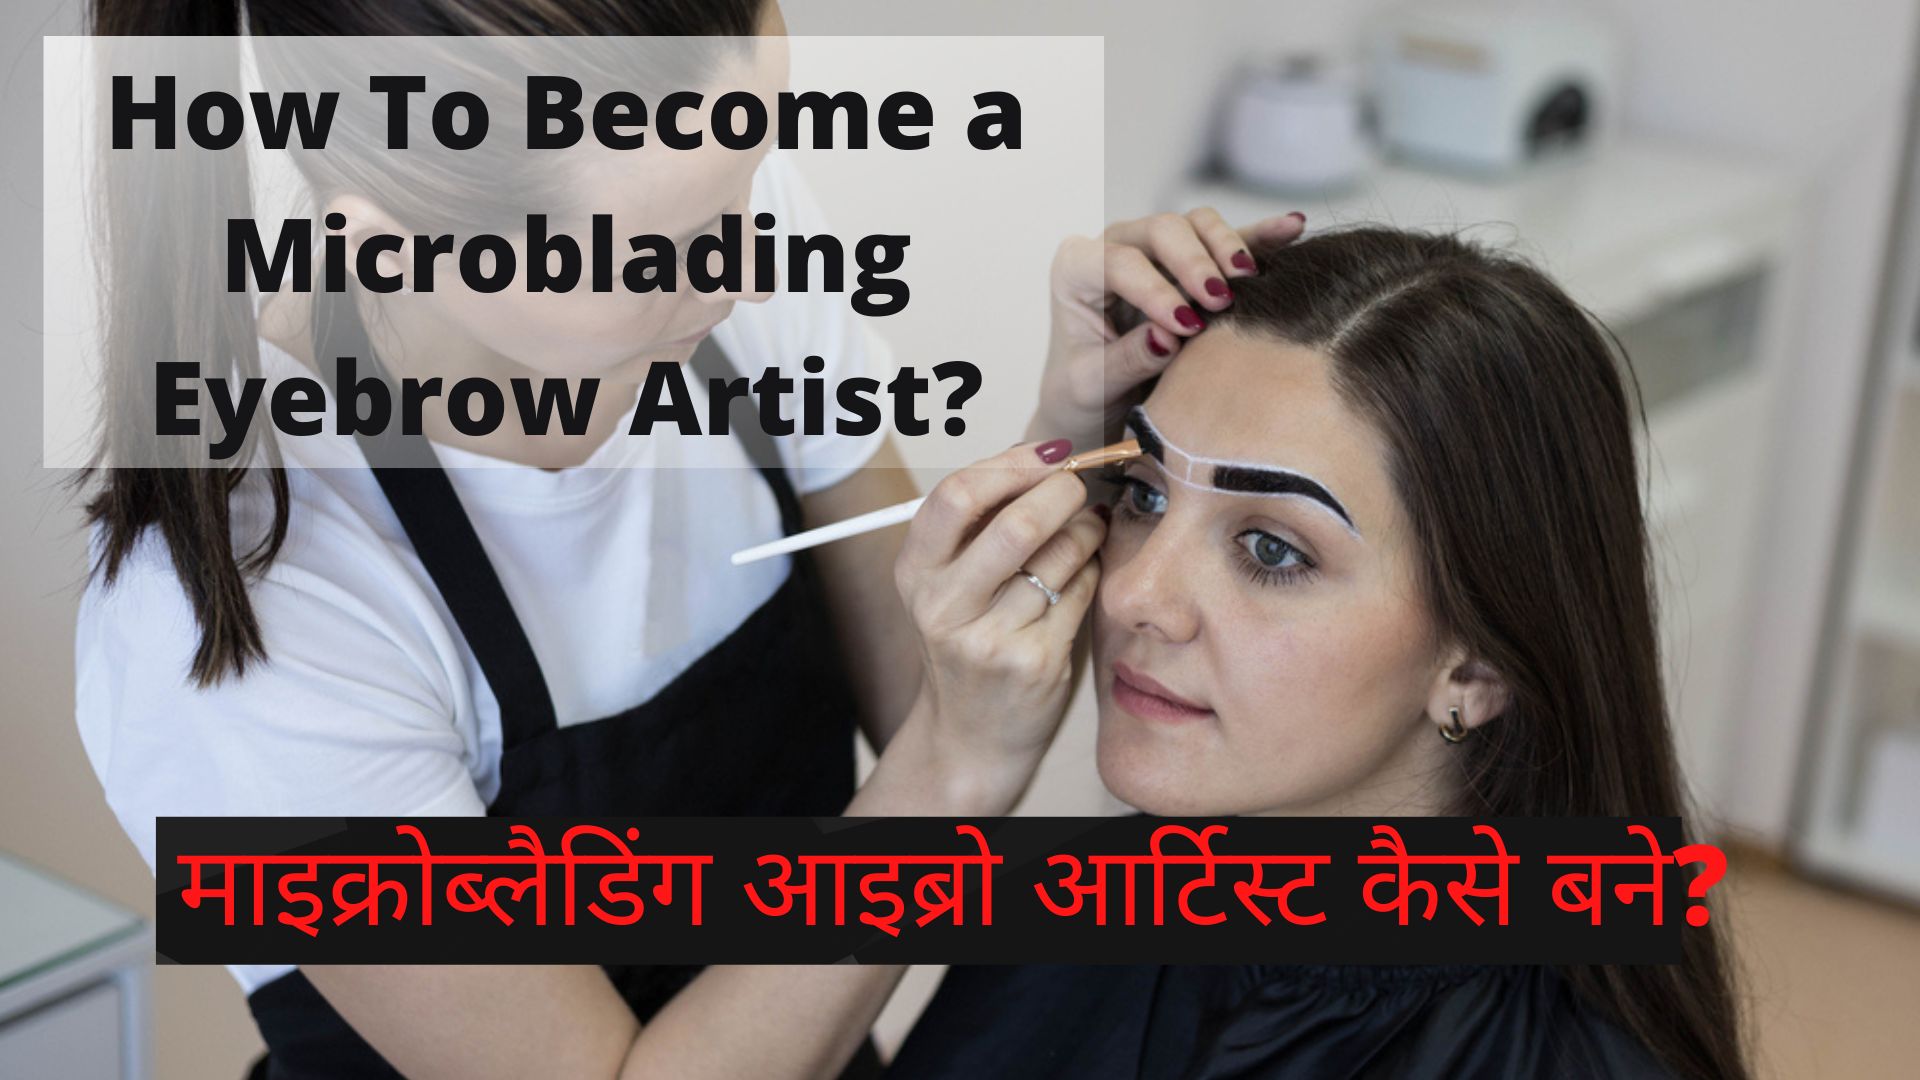 HOW TO BECOME A MAKEUP ARTIST IN